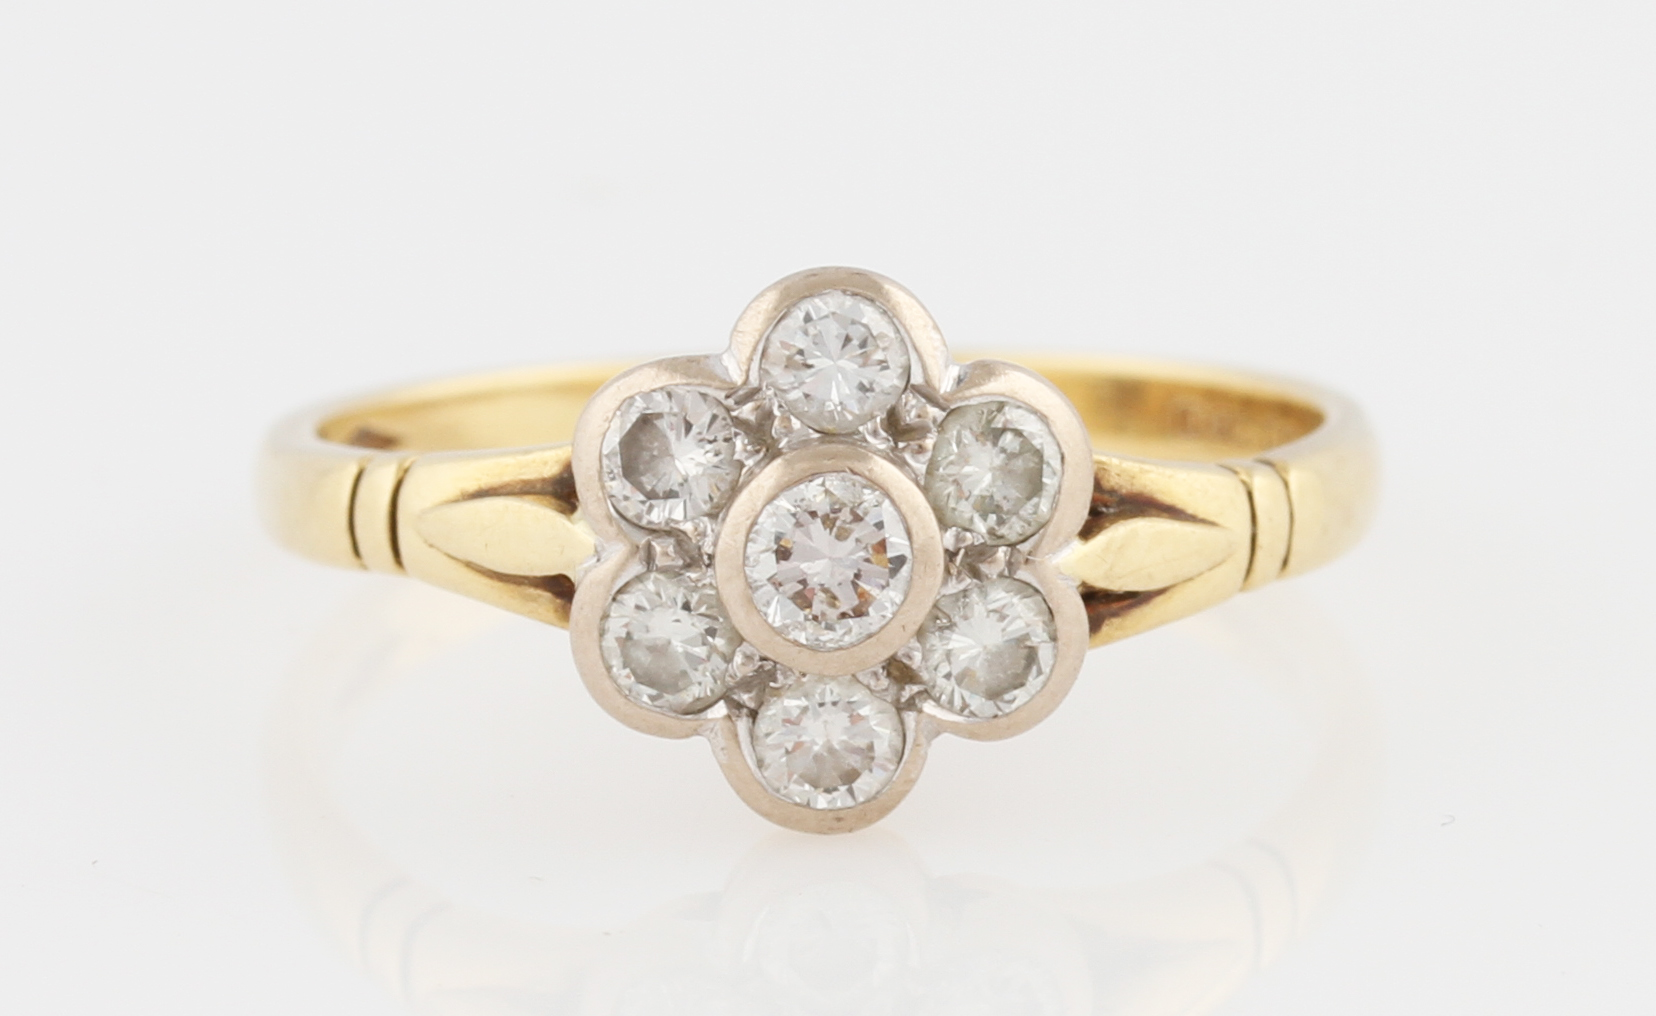 An 18ct yellow gold diamond flower cluster ring, set with a central round brilliant cut diamond,